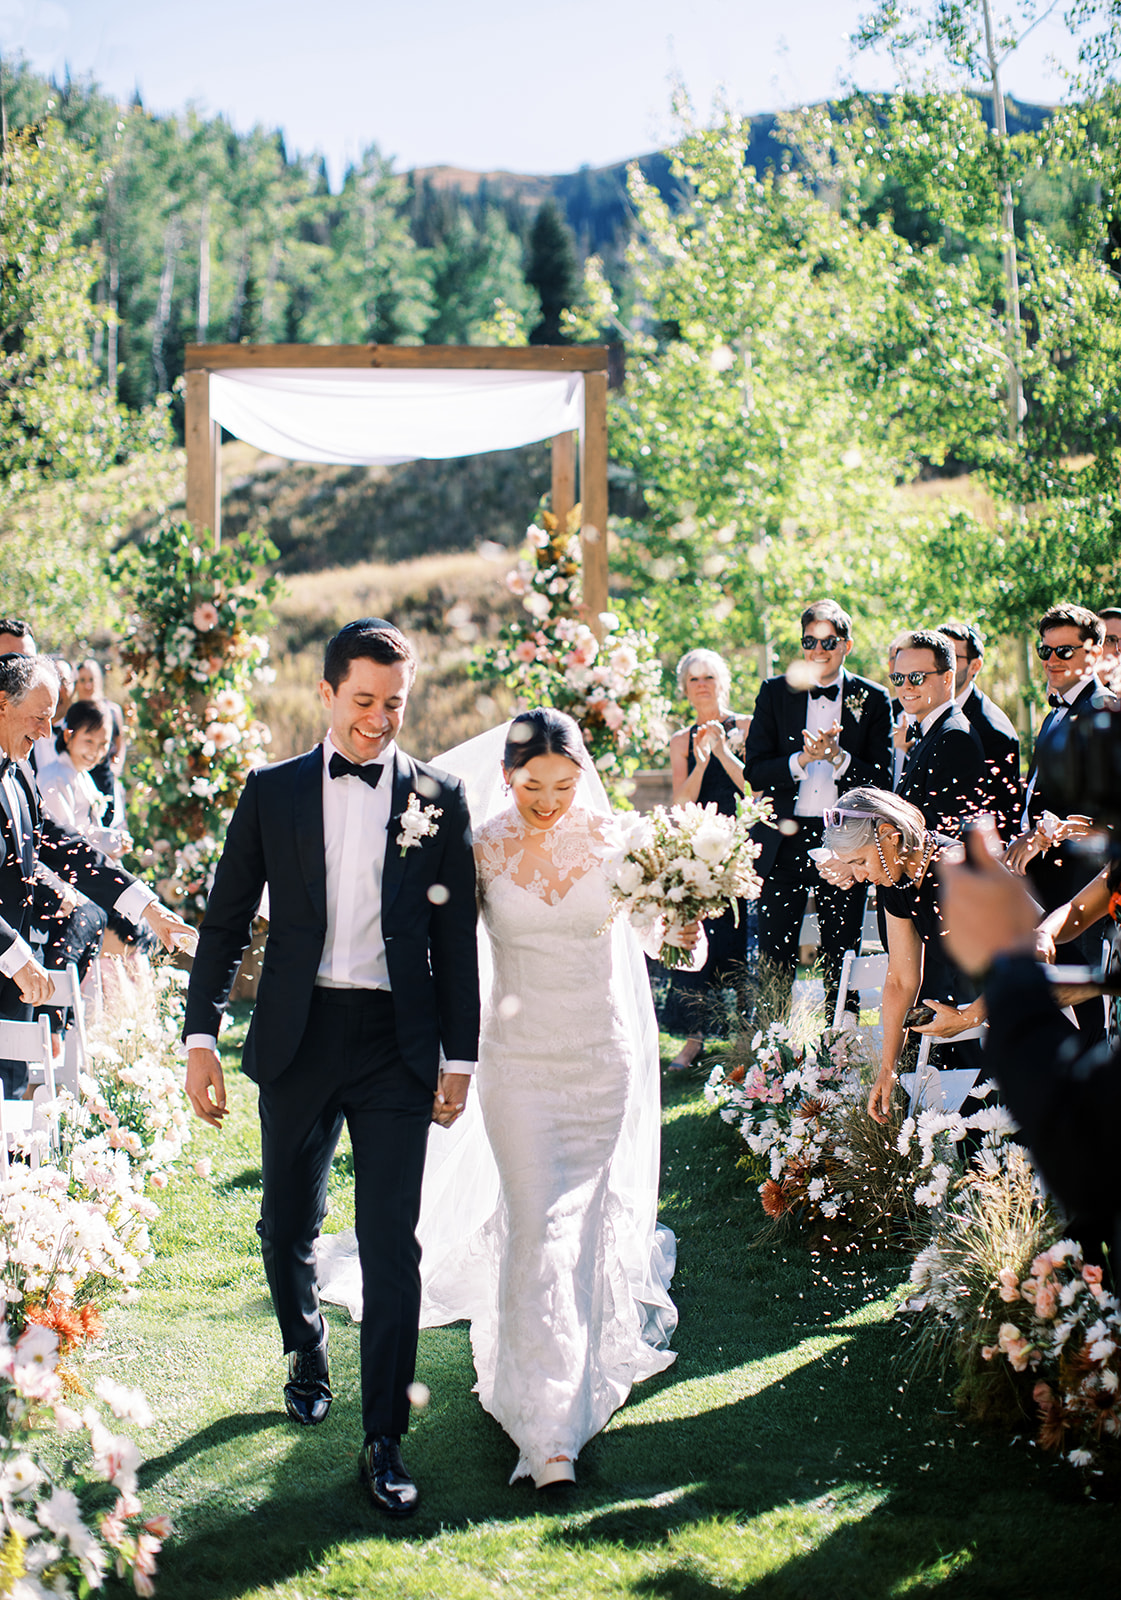 young couple walking up the aisle after wedding ceremony with guests throwing flower petals